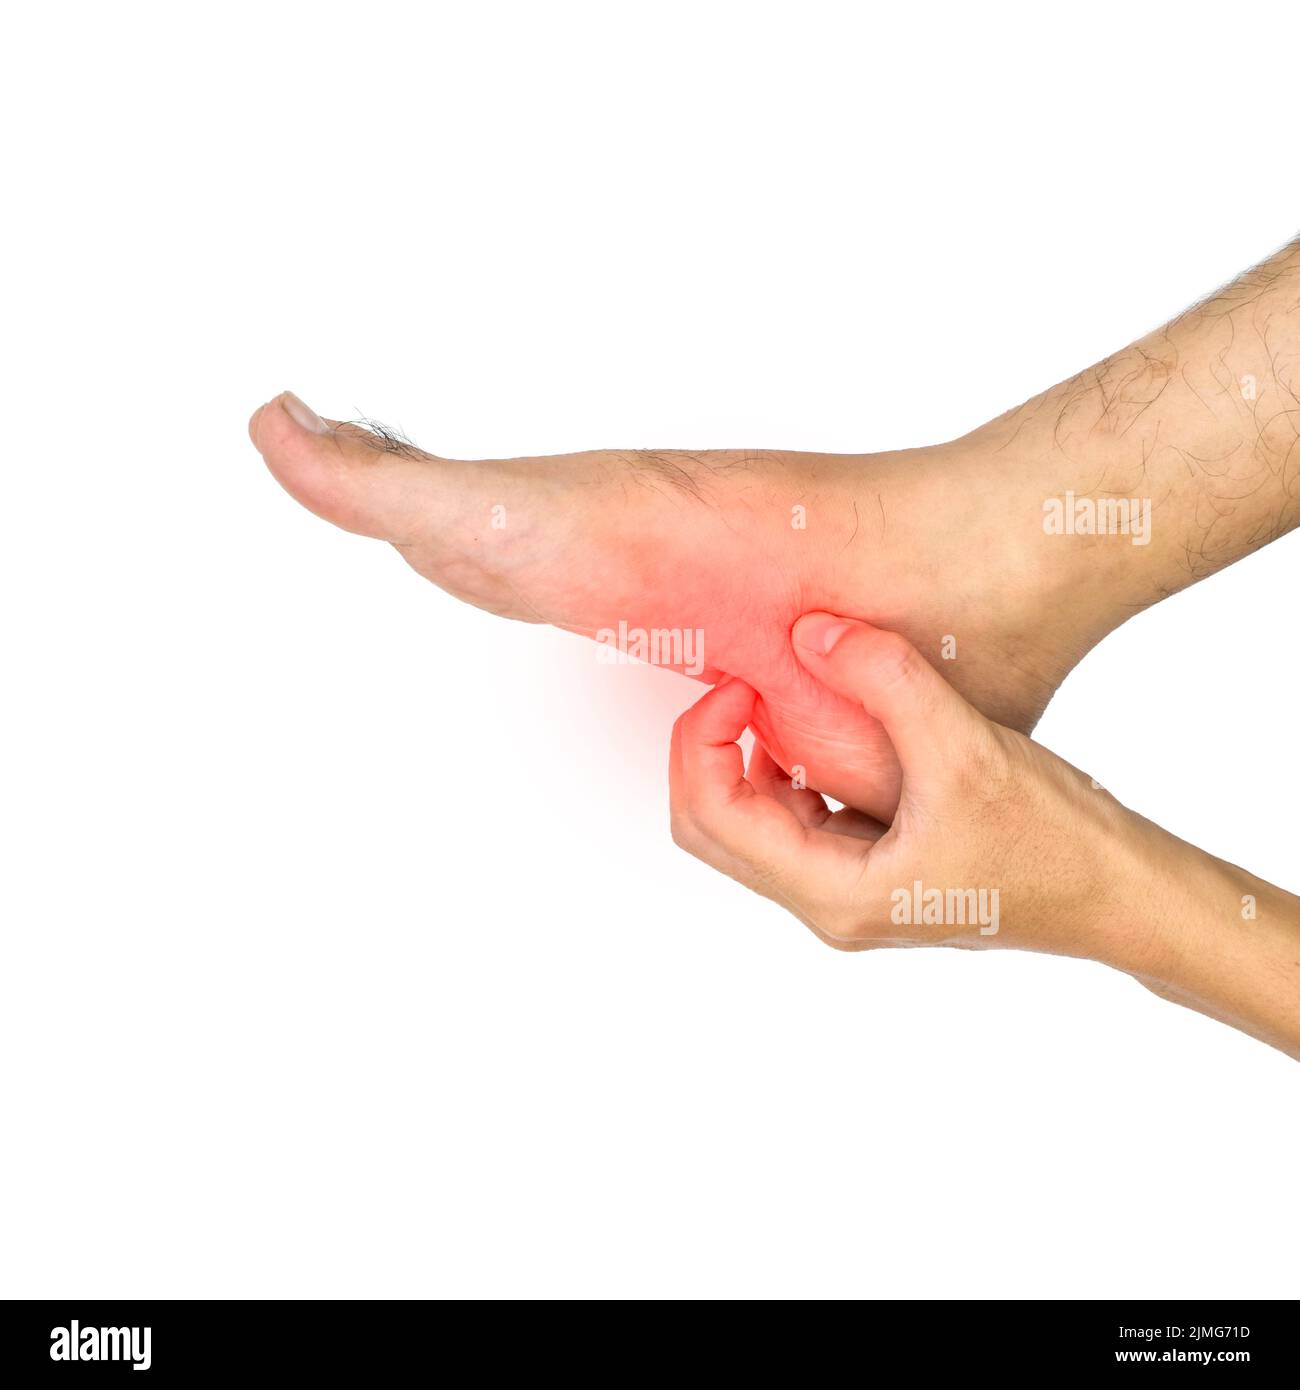 Itchy foot skin of Asian young man. Concept of skin diseases such as scabies, fungal infection, allergy, etc. Stock Photo